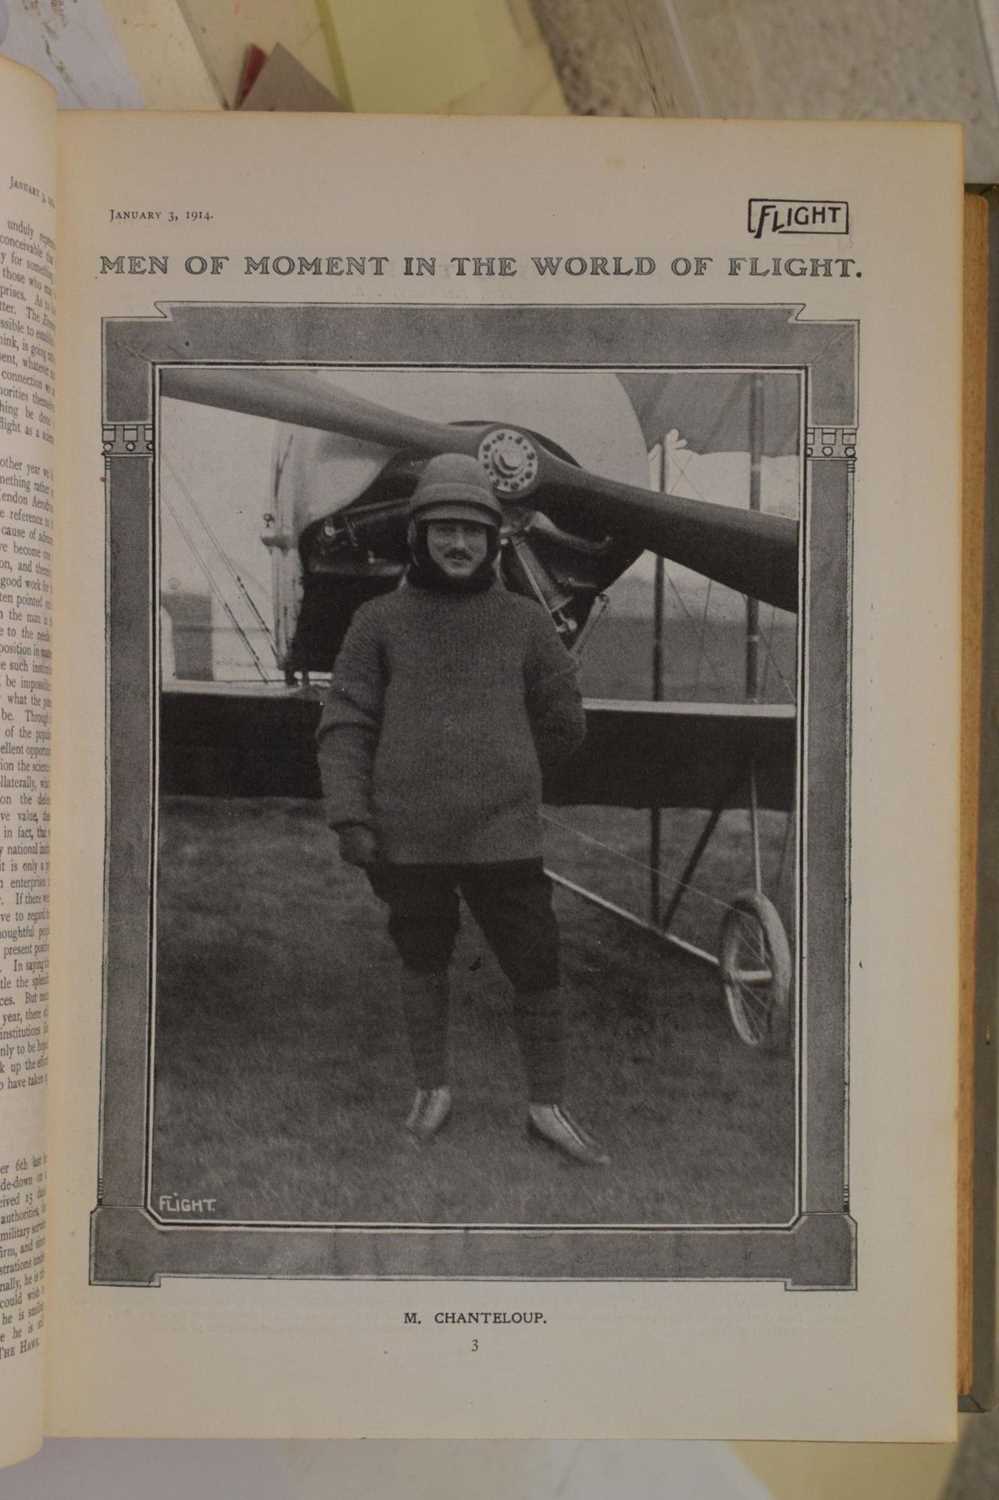 'Flight, First Aero Weekly in the World, A Journal of Aerial Locomotion and Transport', Volumes I-VI - Image 9 of 9